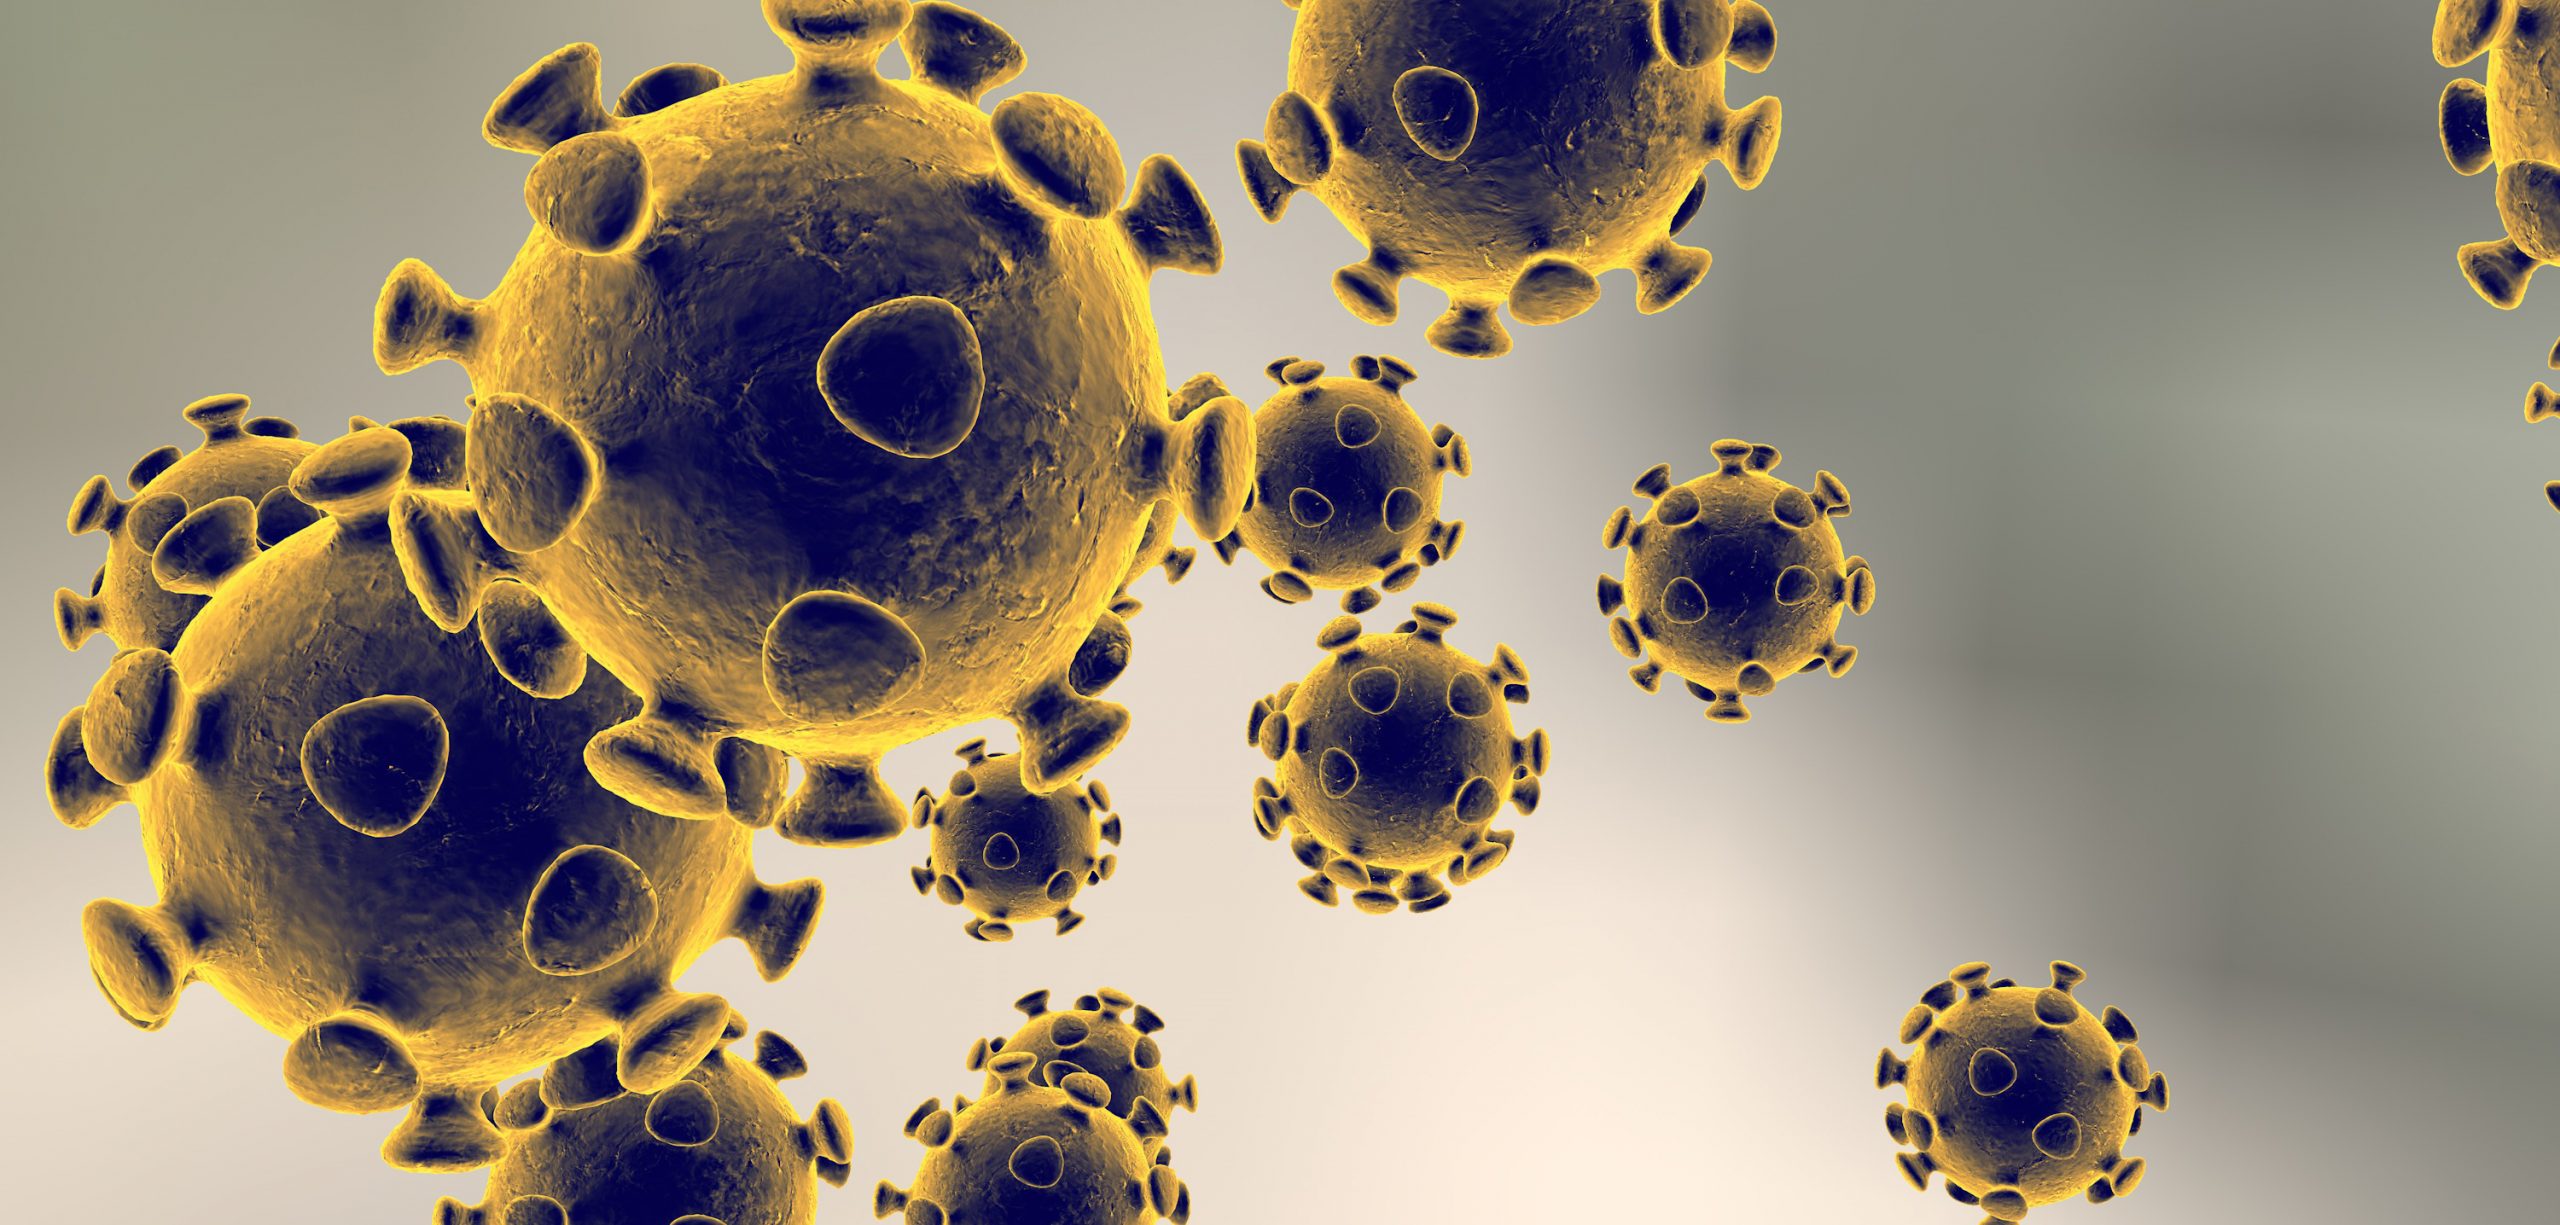 Coronavirus: How to Stay Safe at Home if You Have a Chronic Condition